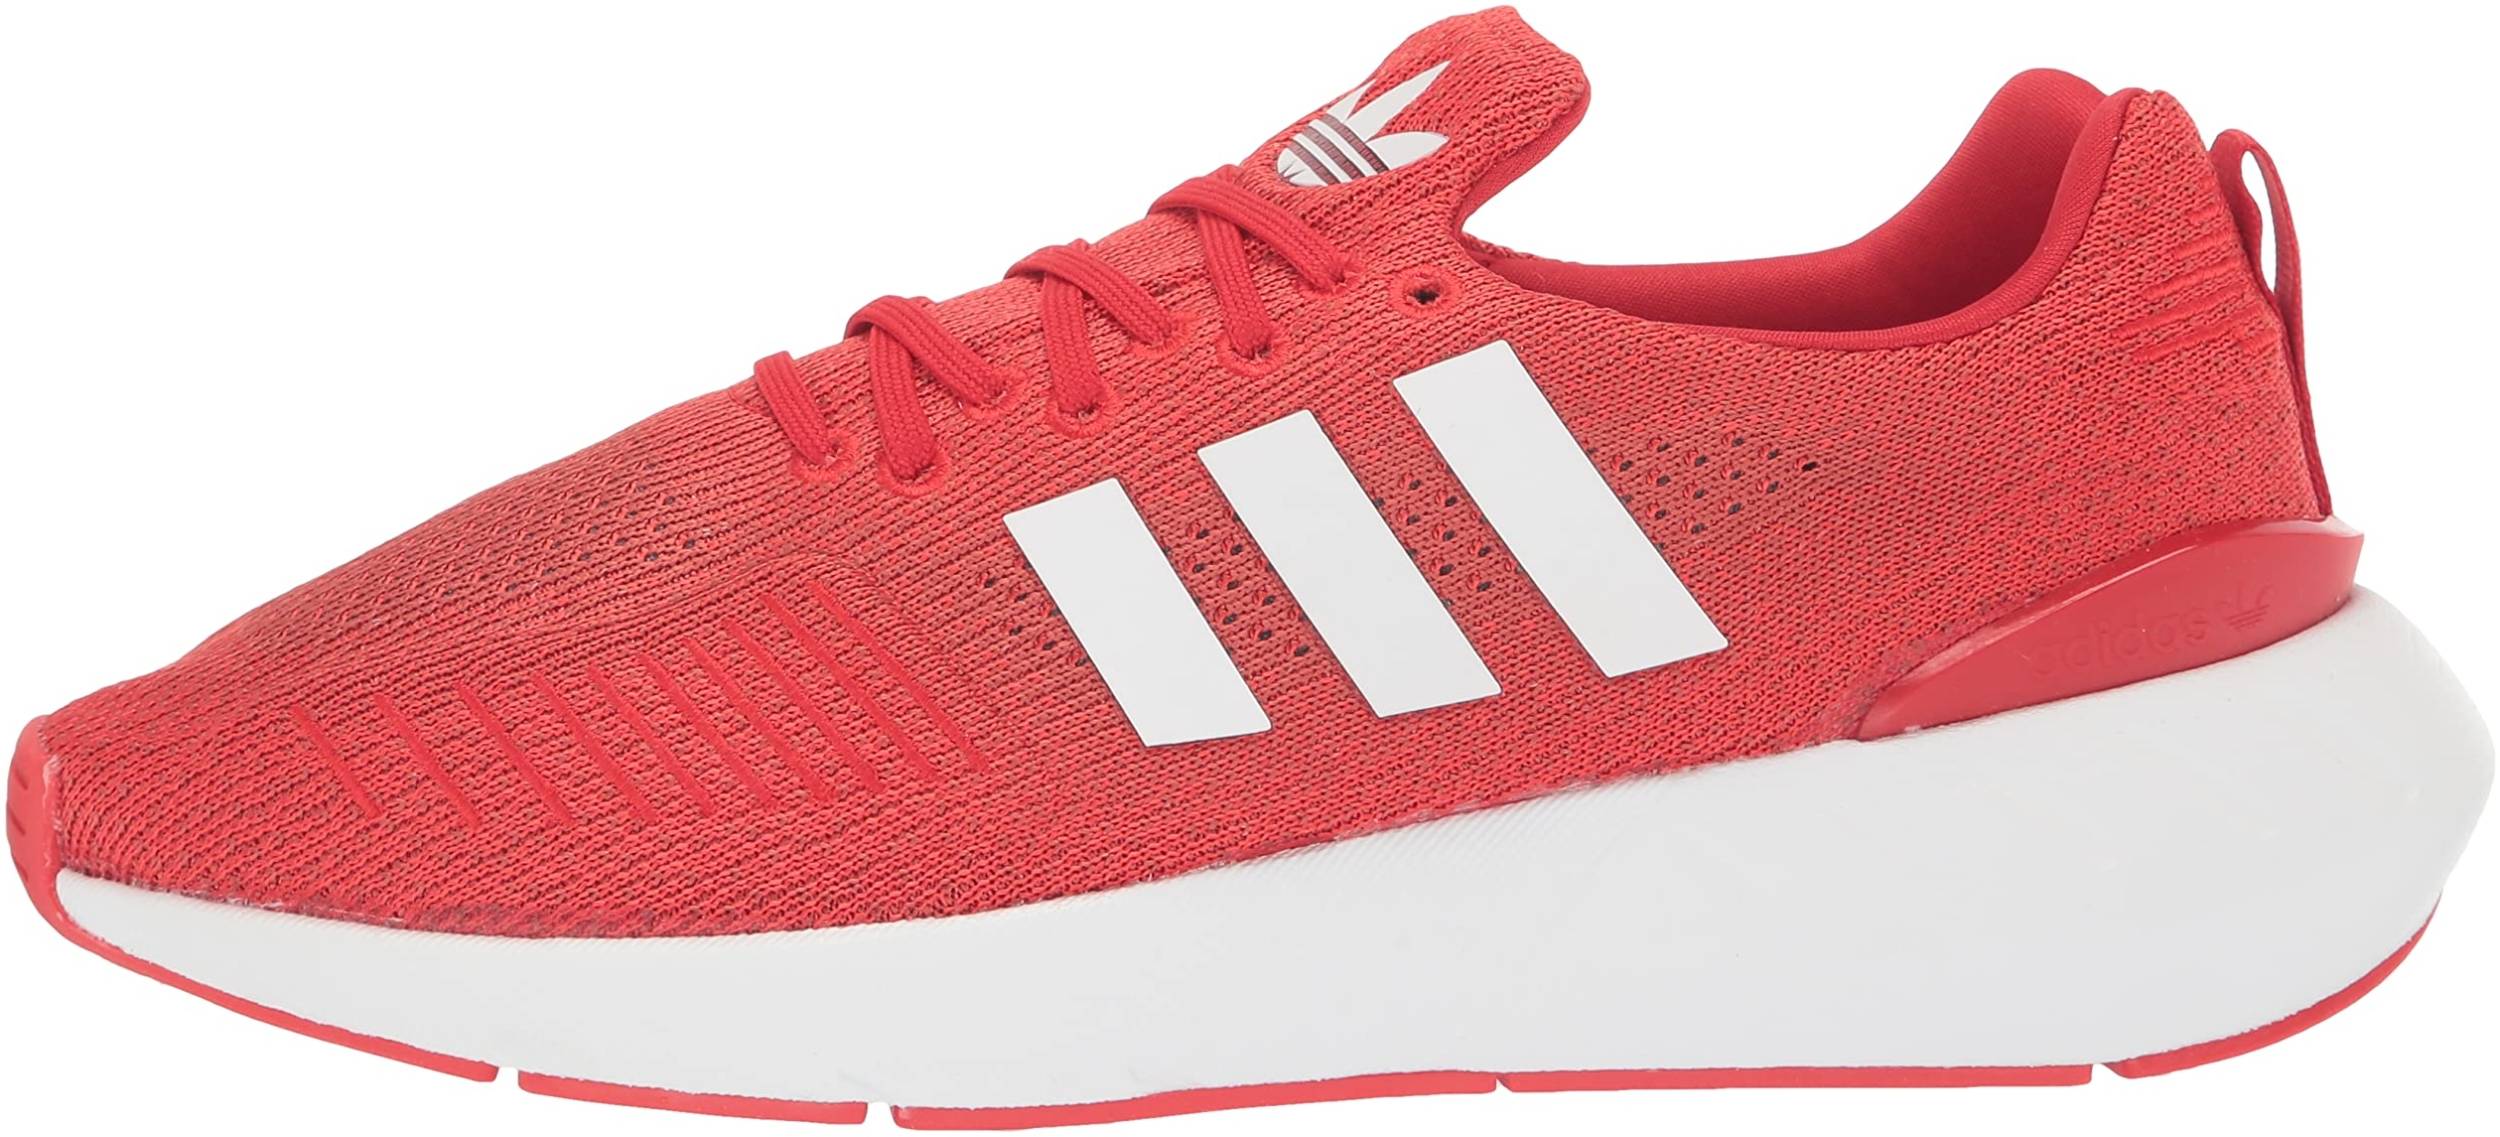 milk bribe pen 90+ Red Adidas sneakers: Save up to 51% | RunRepeat